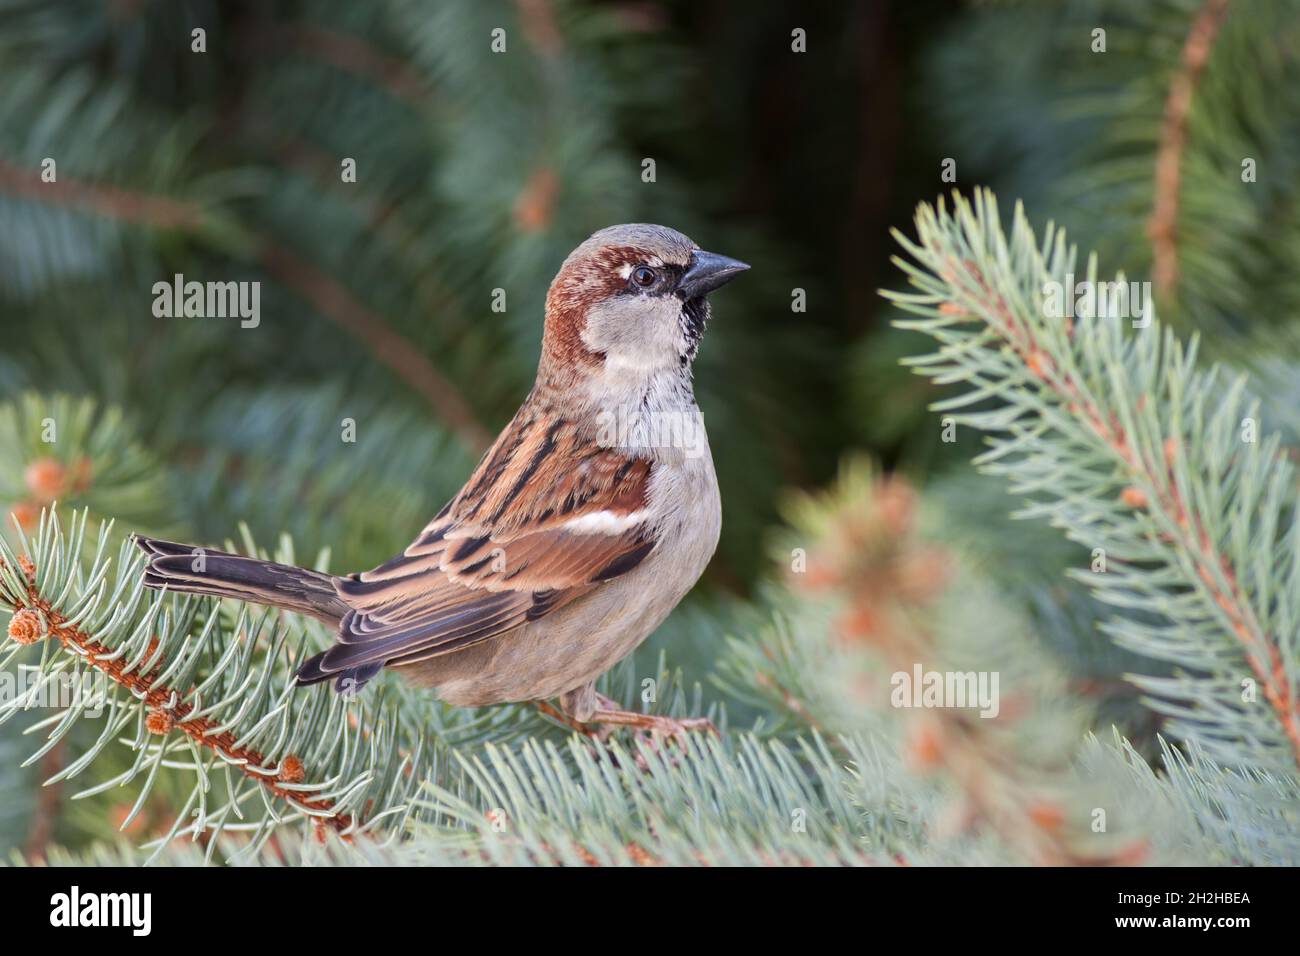 Male house sparrow, Passer domesticus, perched on a tree branch. Stock Photo